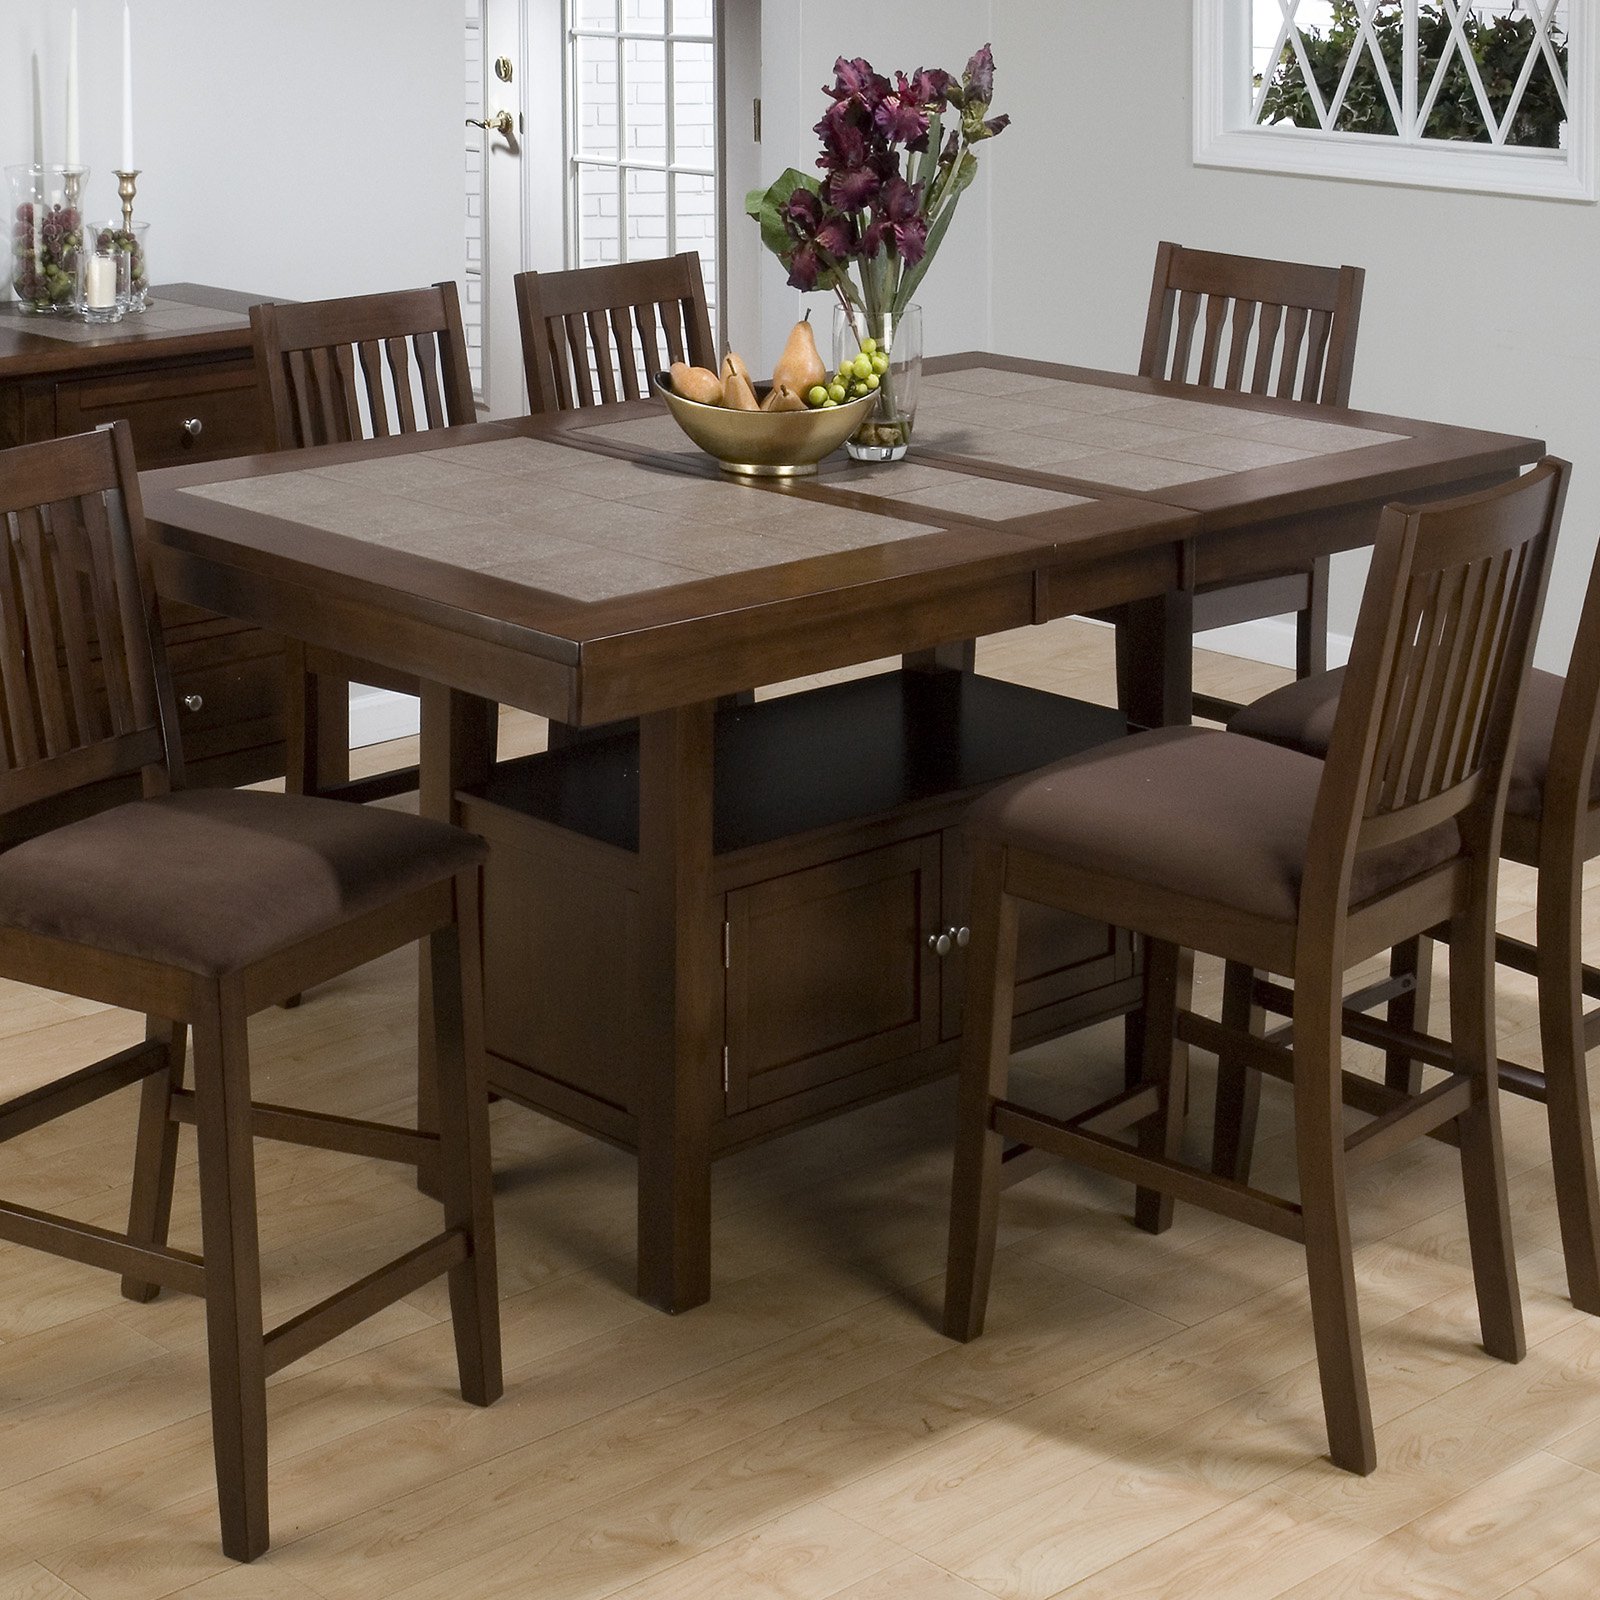 Dining tables with storage | Hawk Haven